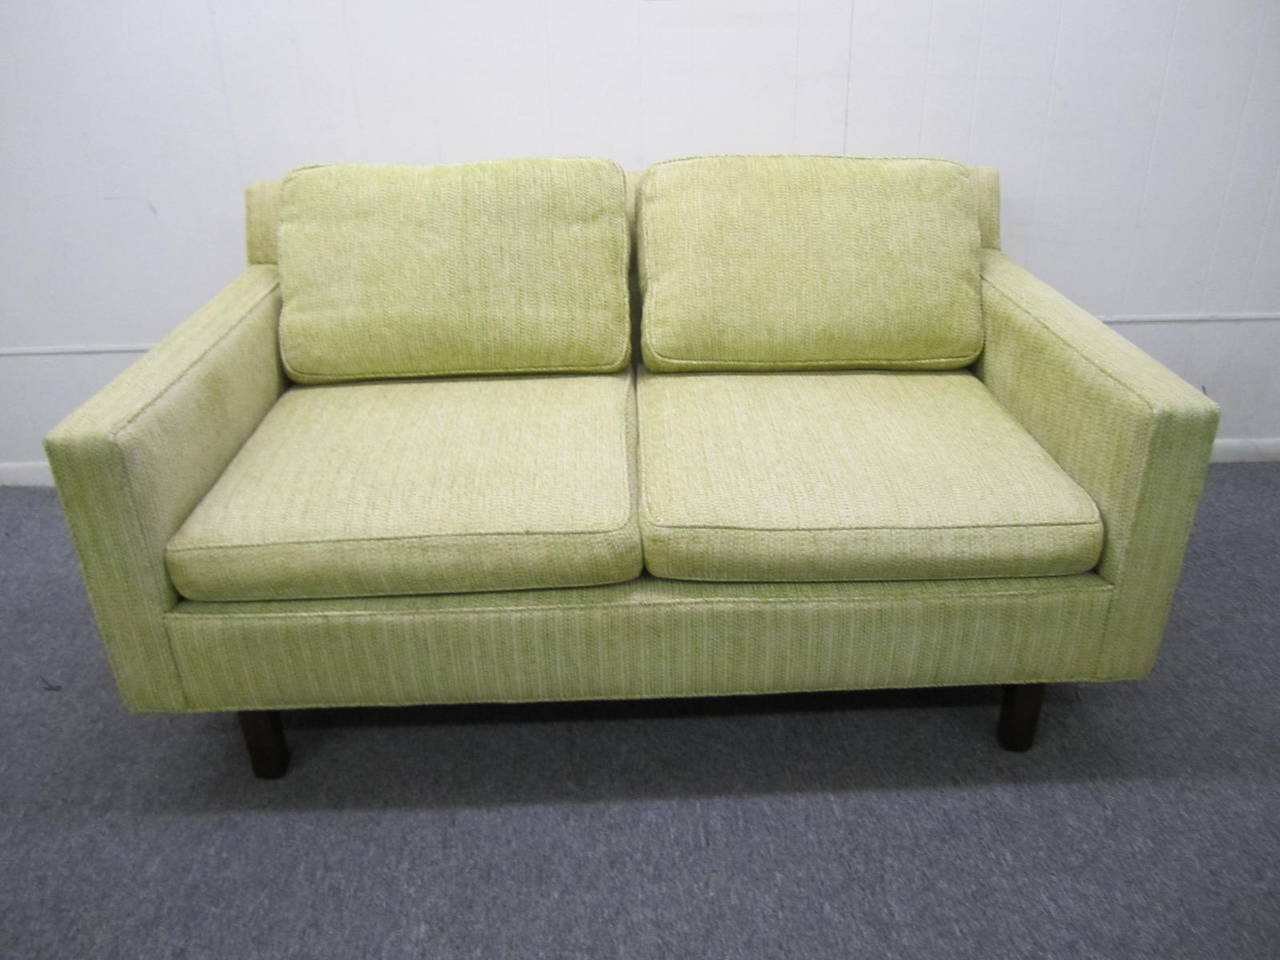 Stunning signed Dunbar 2 seater loveseat sofa. This piece is upholstered in it's original celery green woven wool in very nice to excellent condition. The loose seat cushions are quite firm and will need new foam-the rest of the sofa is quite soft